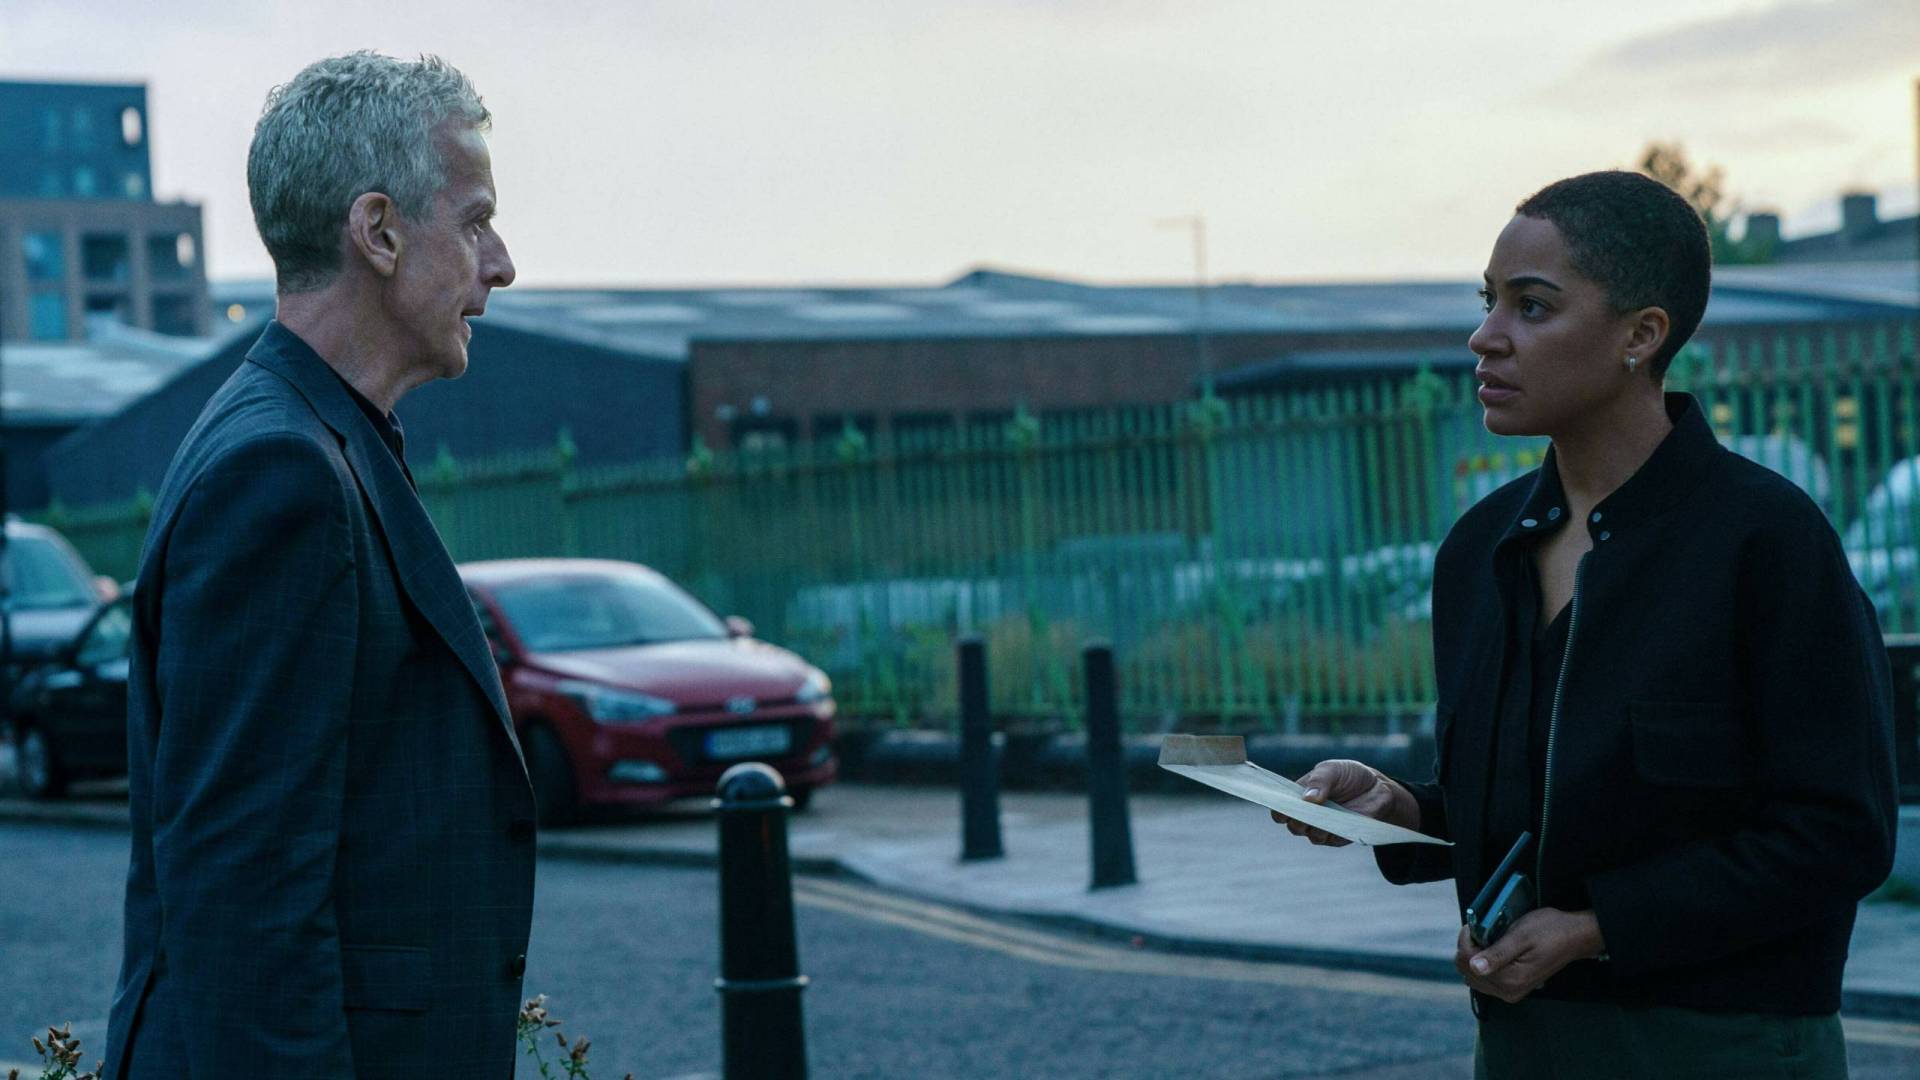 An older white man and younger Black woman talk in the street, near a British industrial estate.